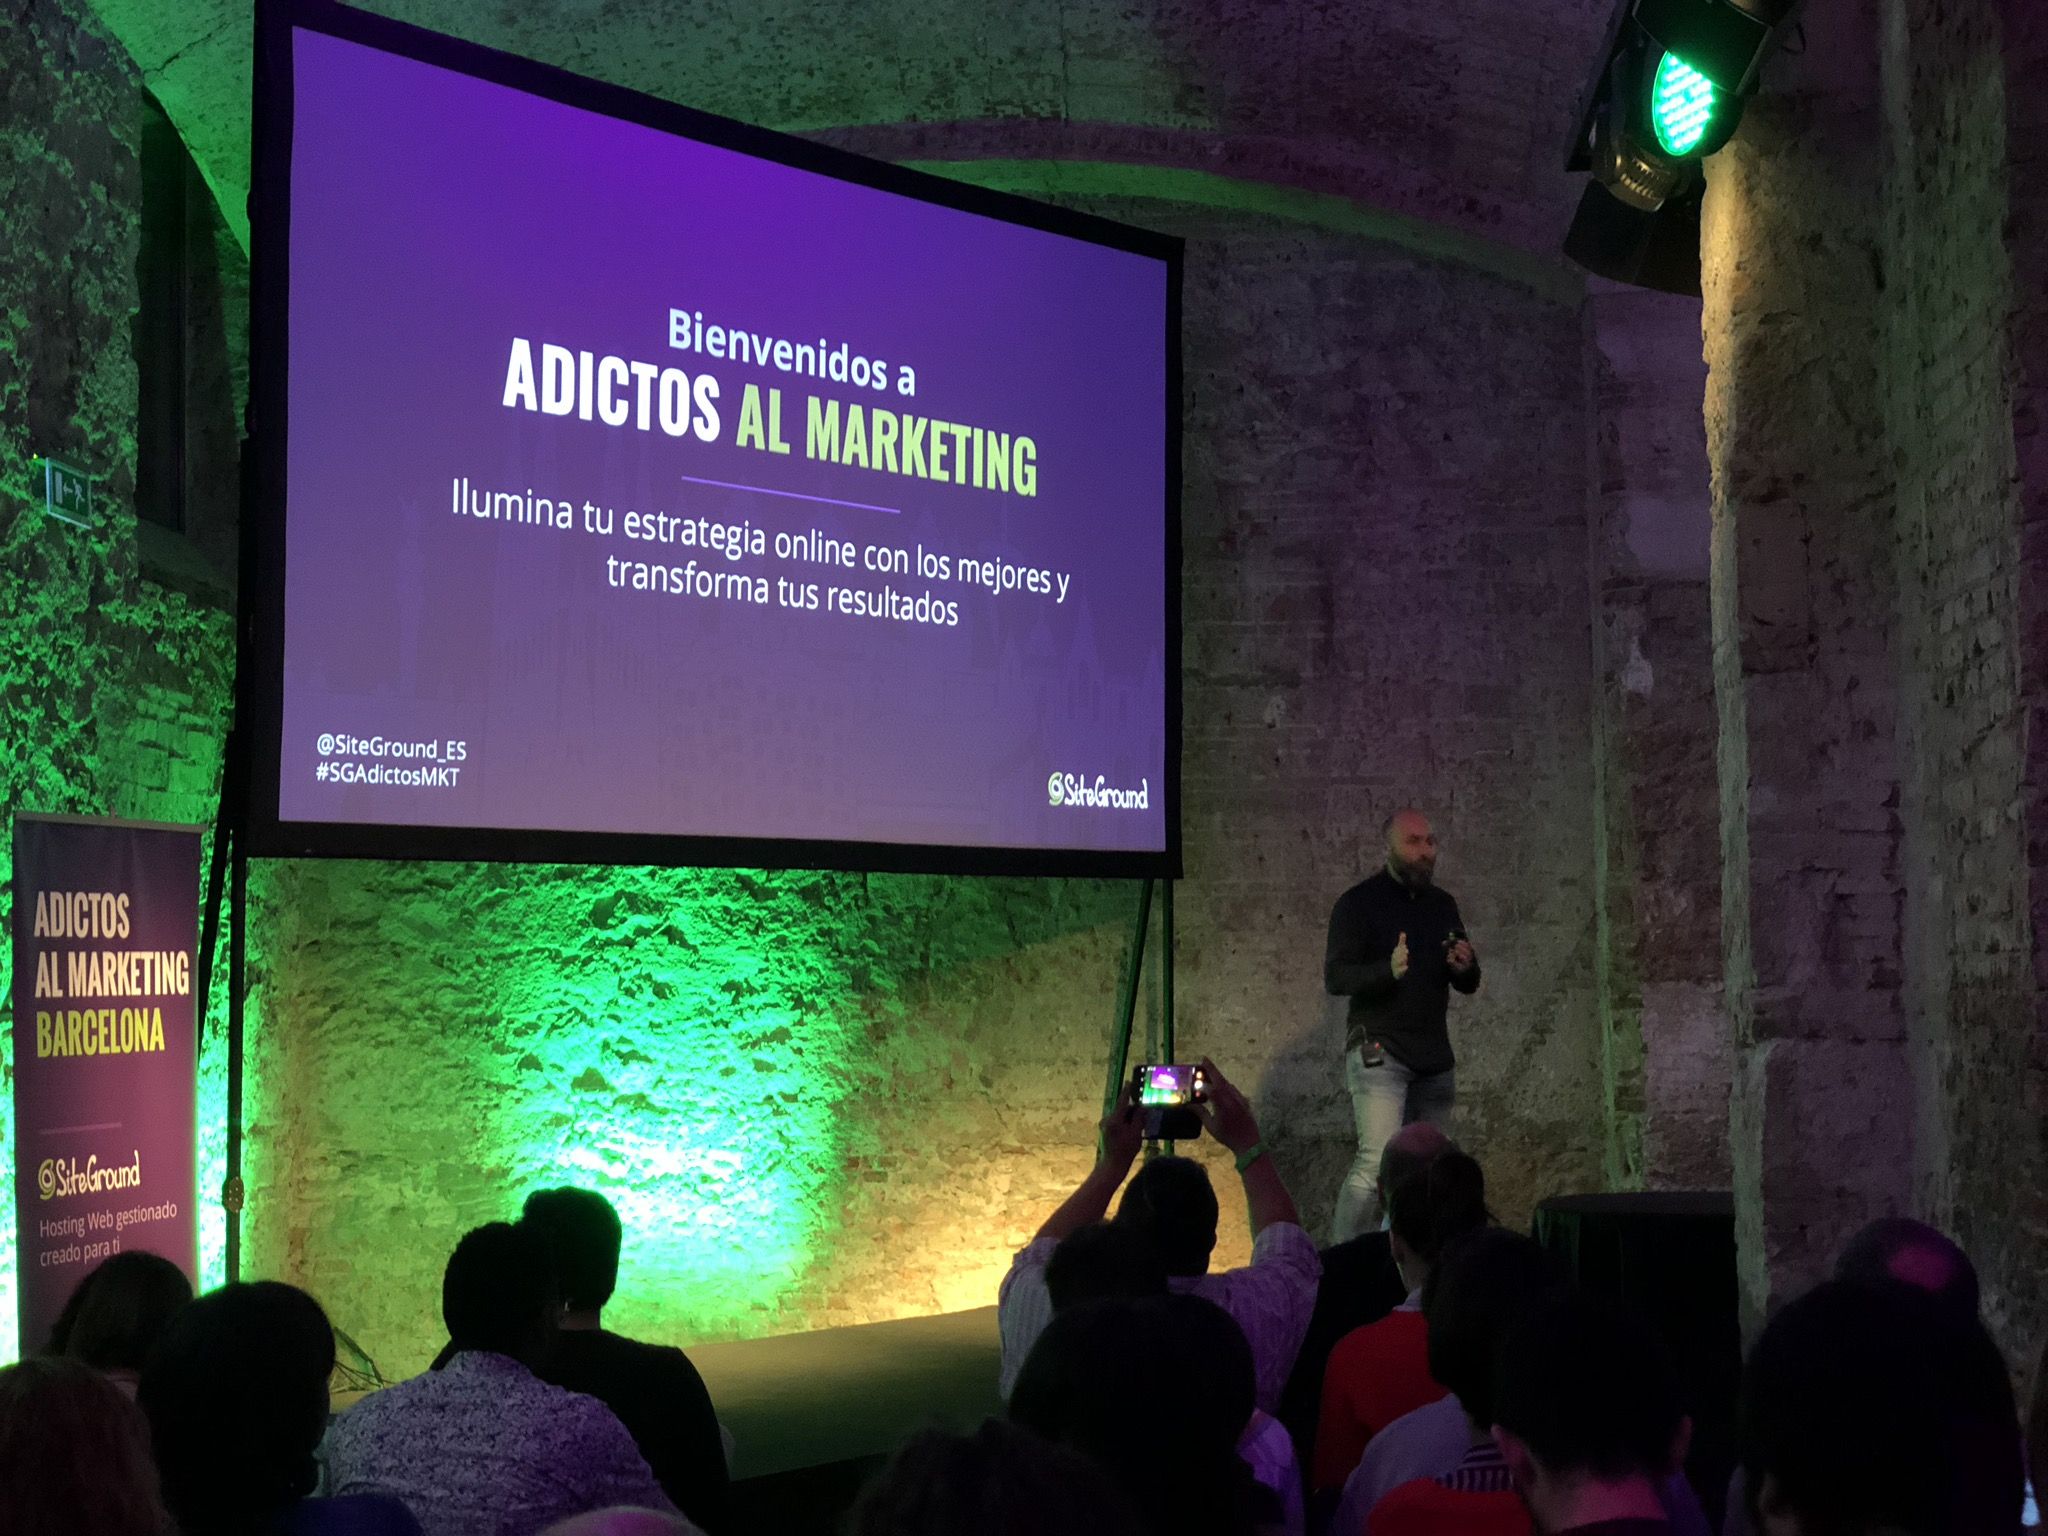 We attended Addicts to Marketing, the great SiteGround Barcelona event